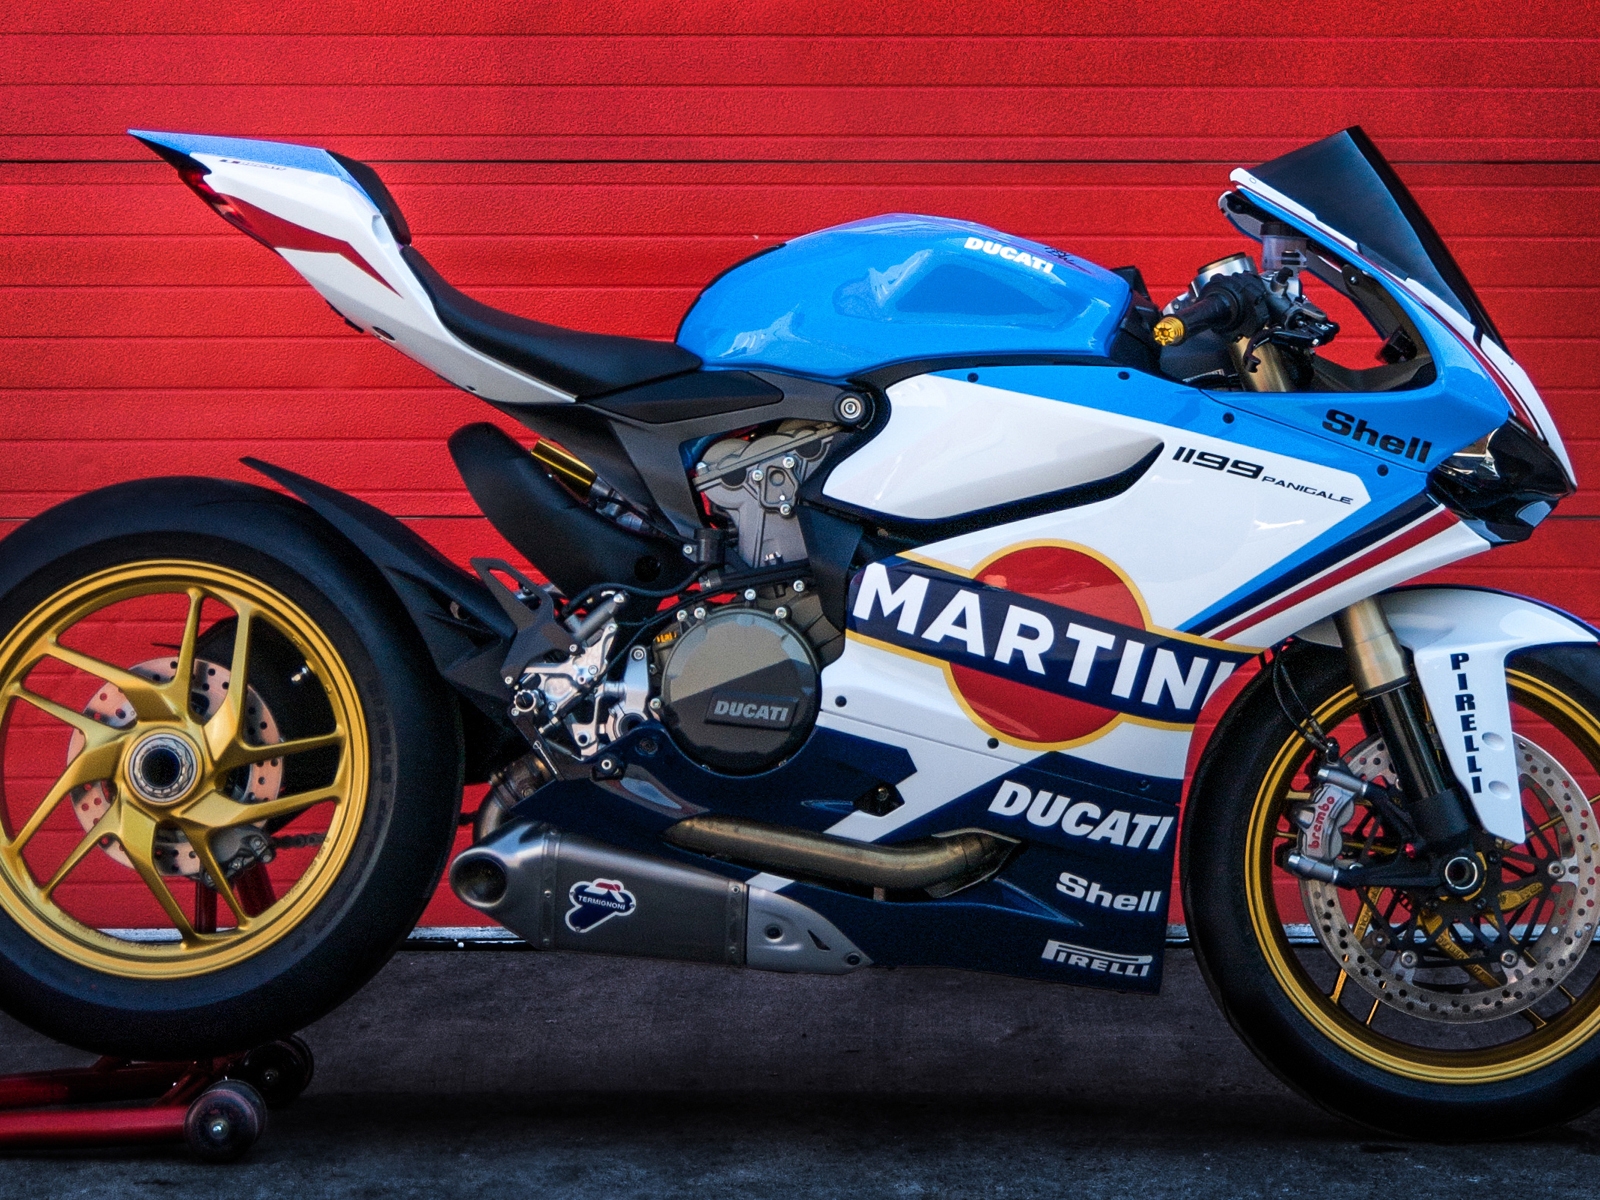 Ducati superbike 1199 Panigale for 1600 x 1200 resolution